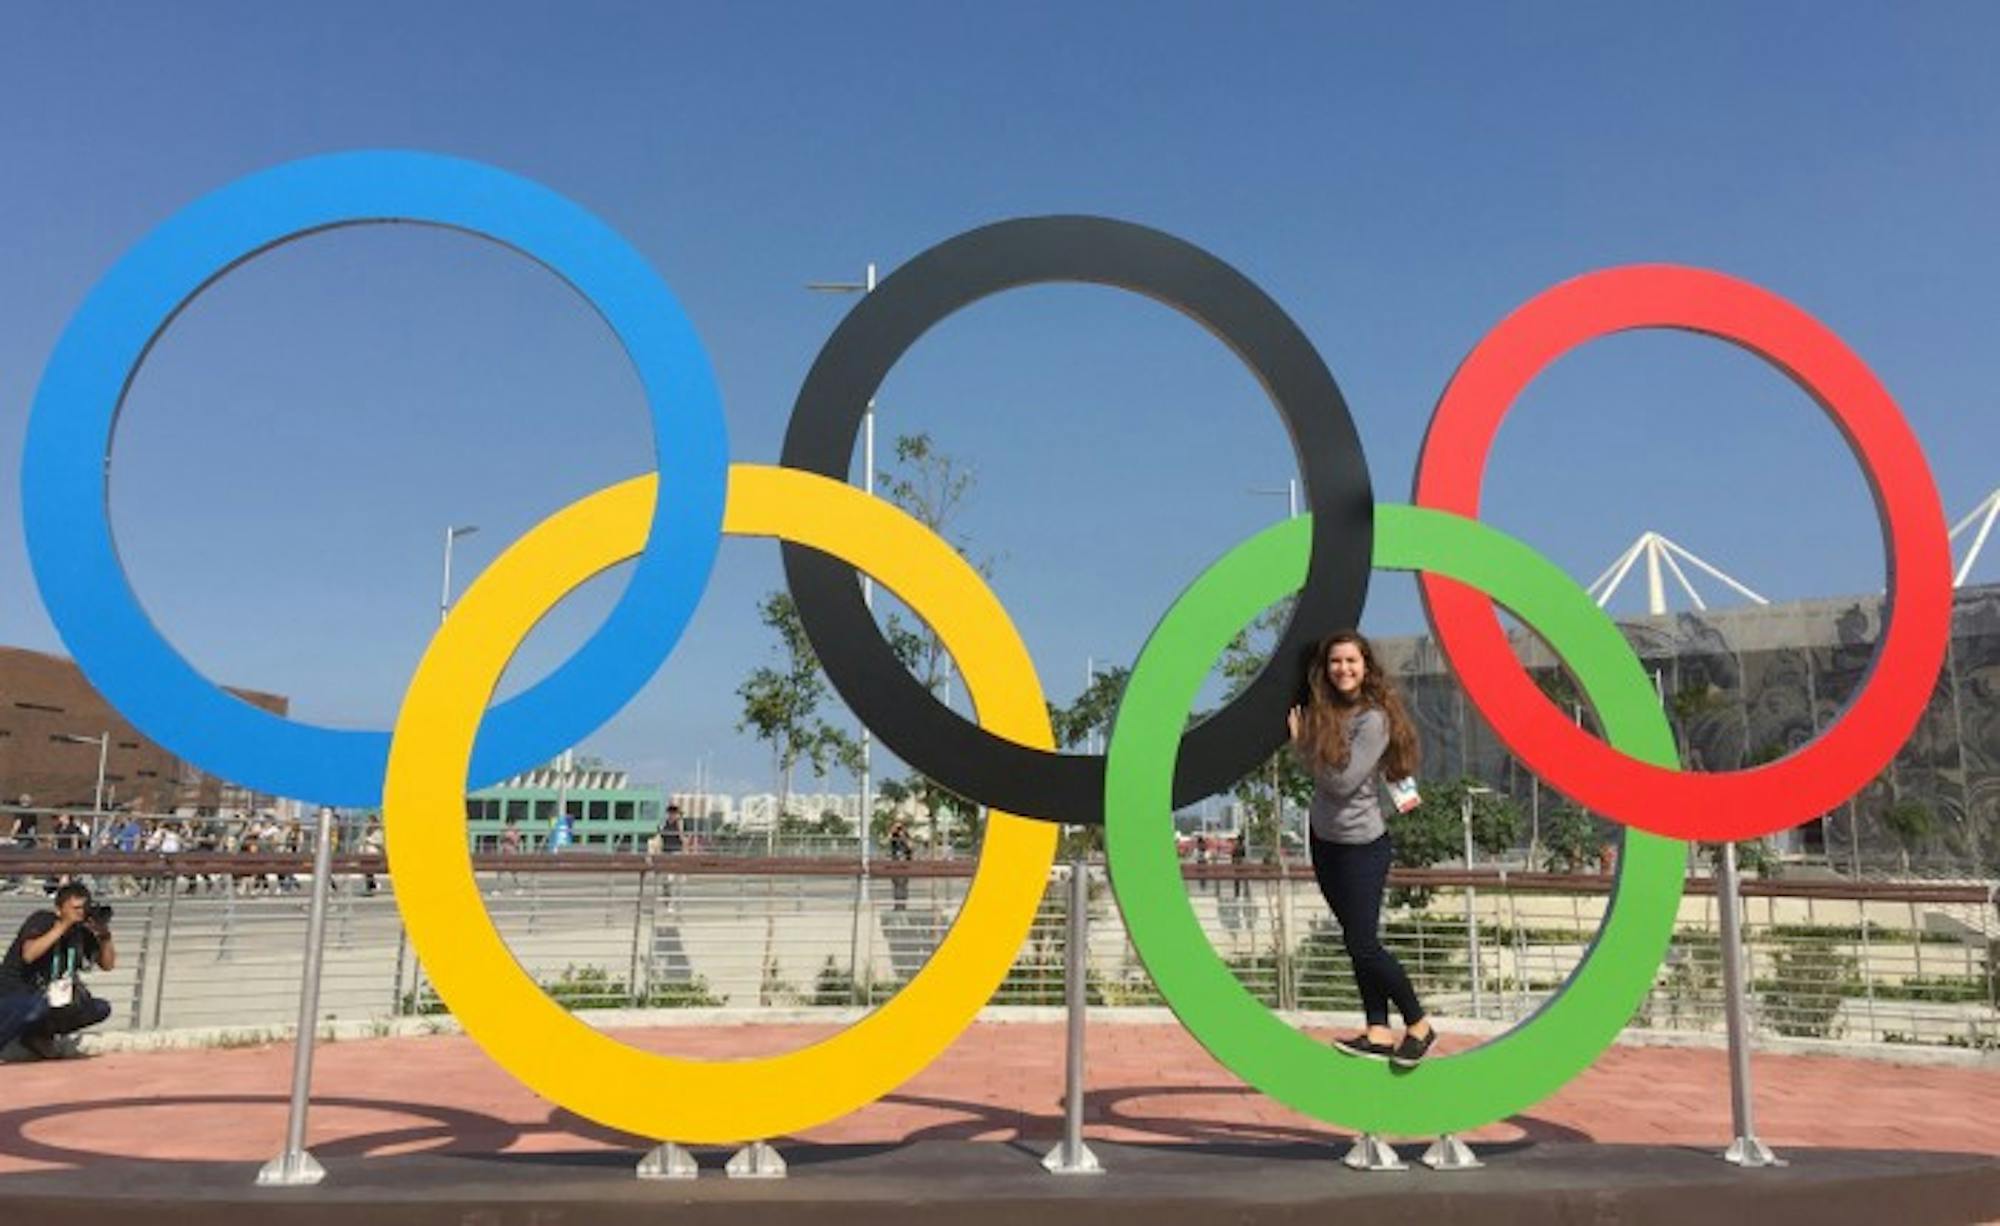 Senior Payton Erlemeier stands with the Olympic rings in Rio de Janeiro, where she was an NBC News intern for the Games over the summer after working for the network at Notre Dame football games.